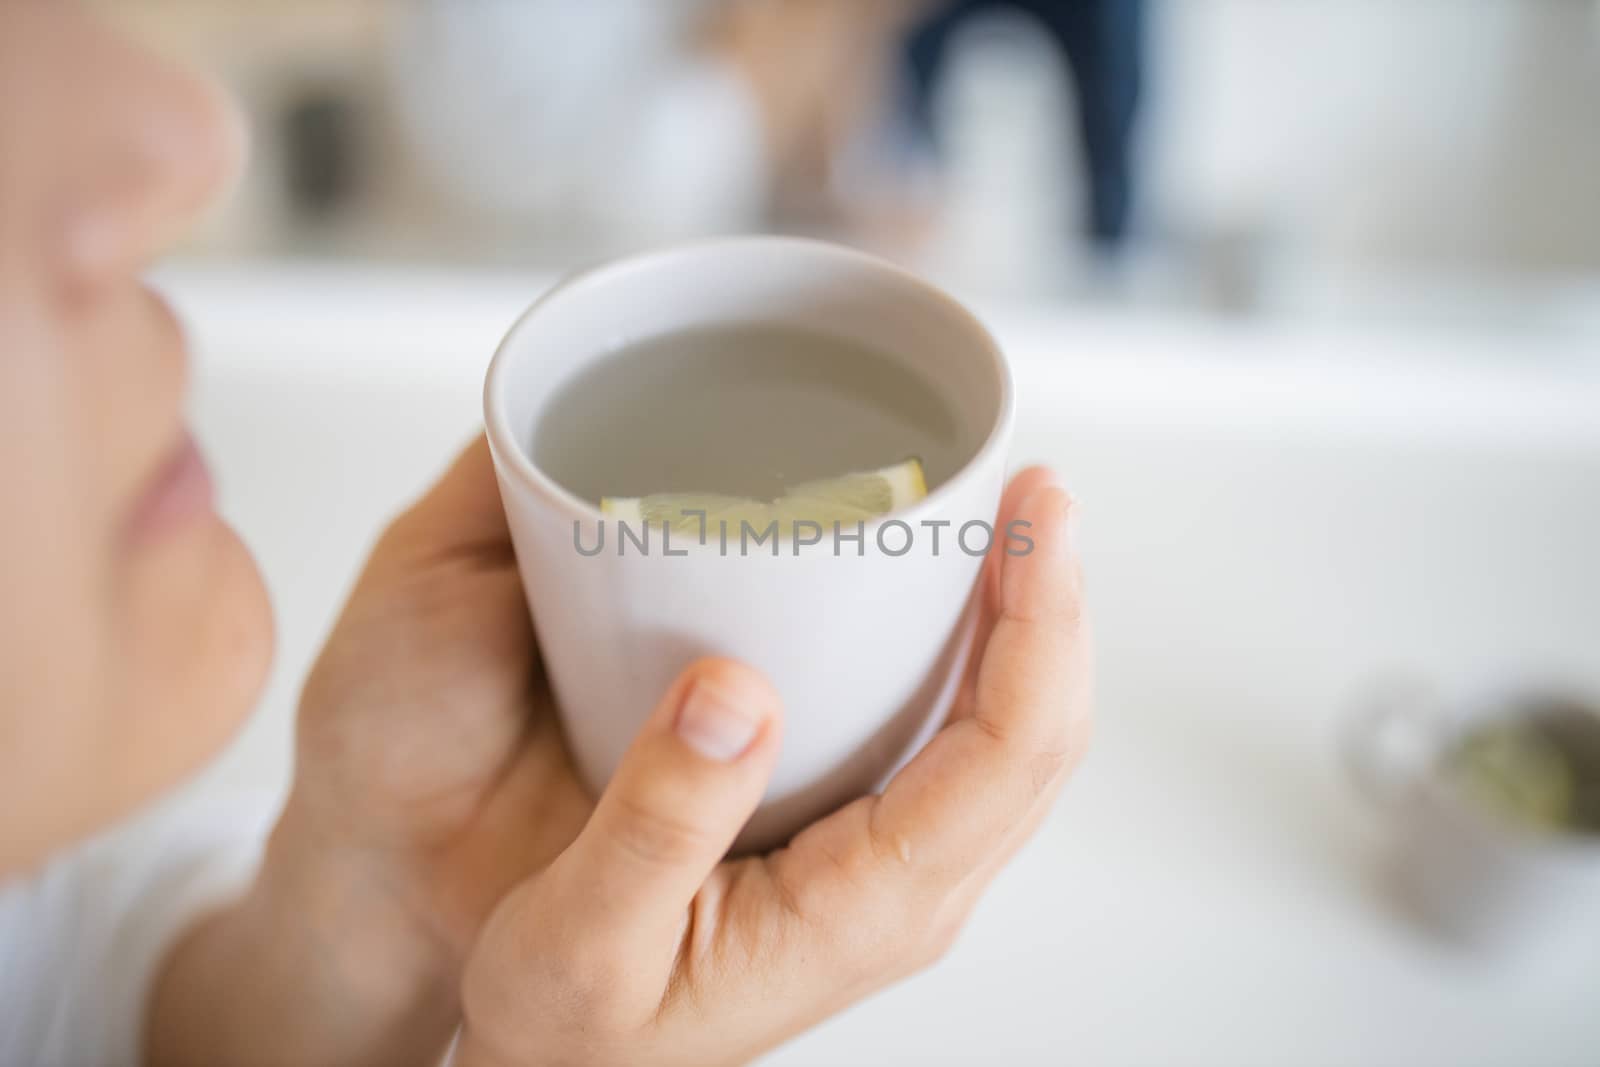 Woman gently blowing on hot cup of lemon tea with a lemon slice floating inside. Woman smelling lemon-flavored drink in cup. Sweet citric beverages